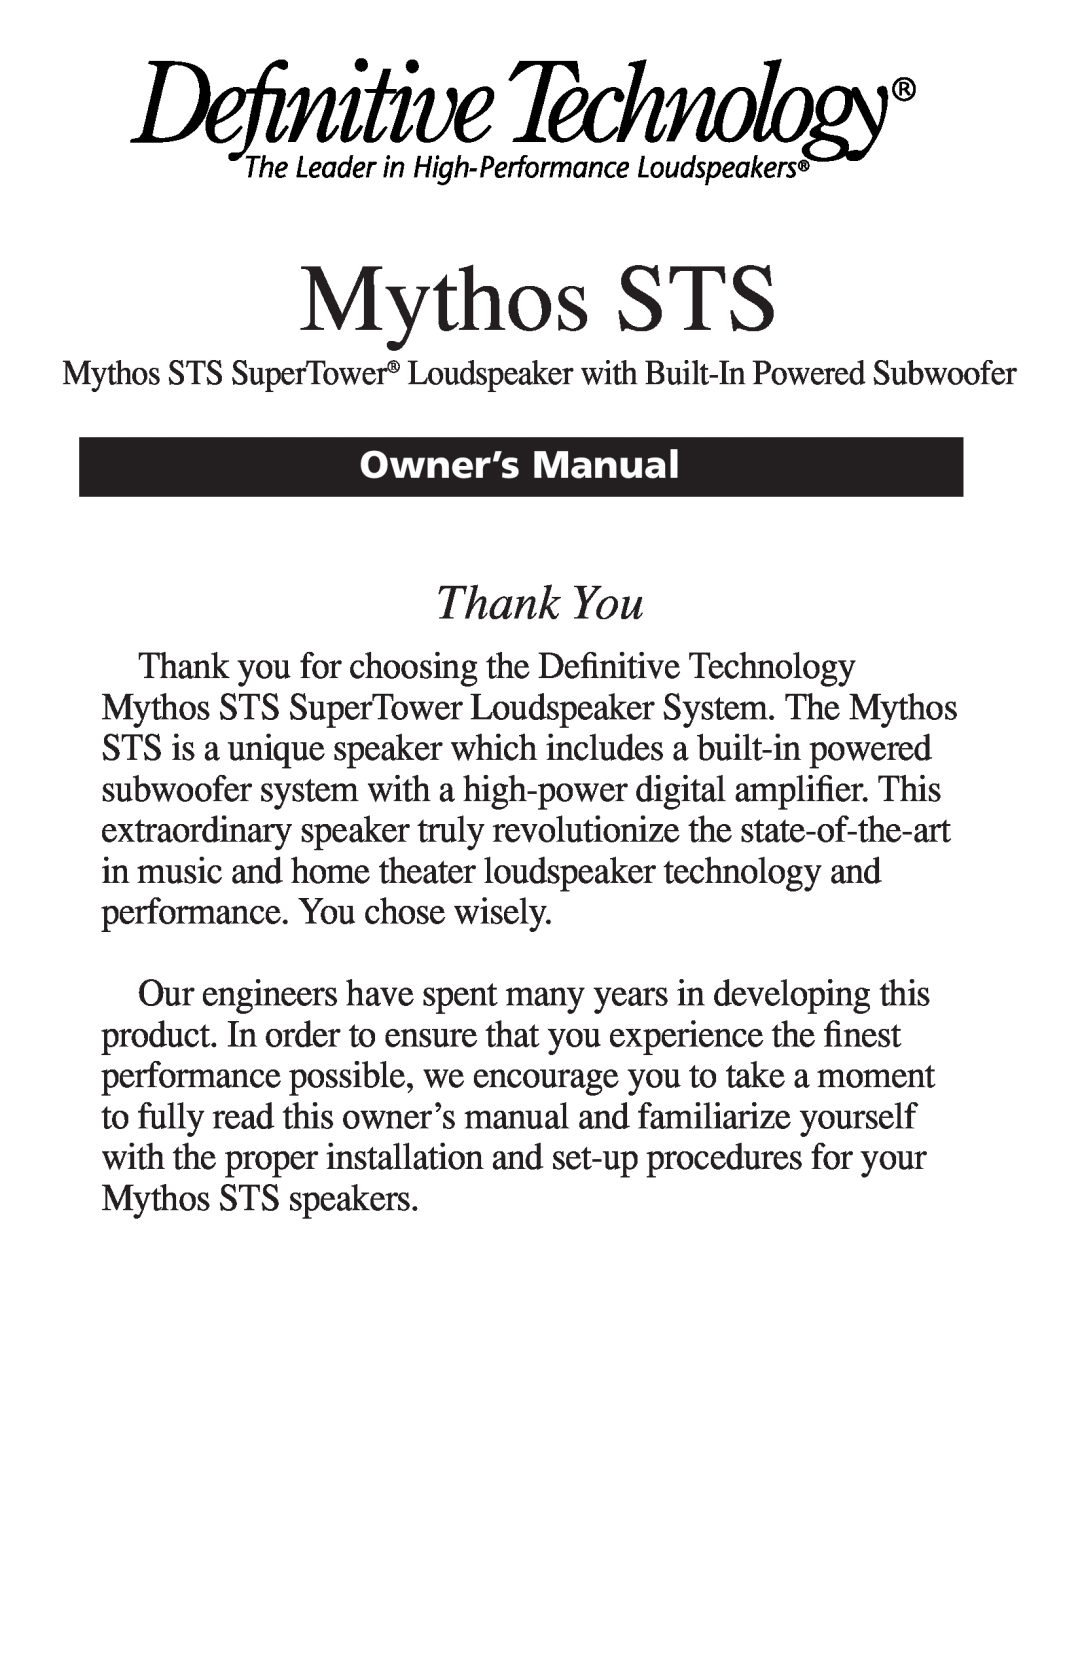 Definitive Technology VEIB owner manual Mythos STS, Thank You 